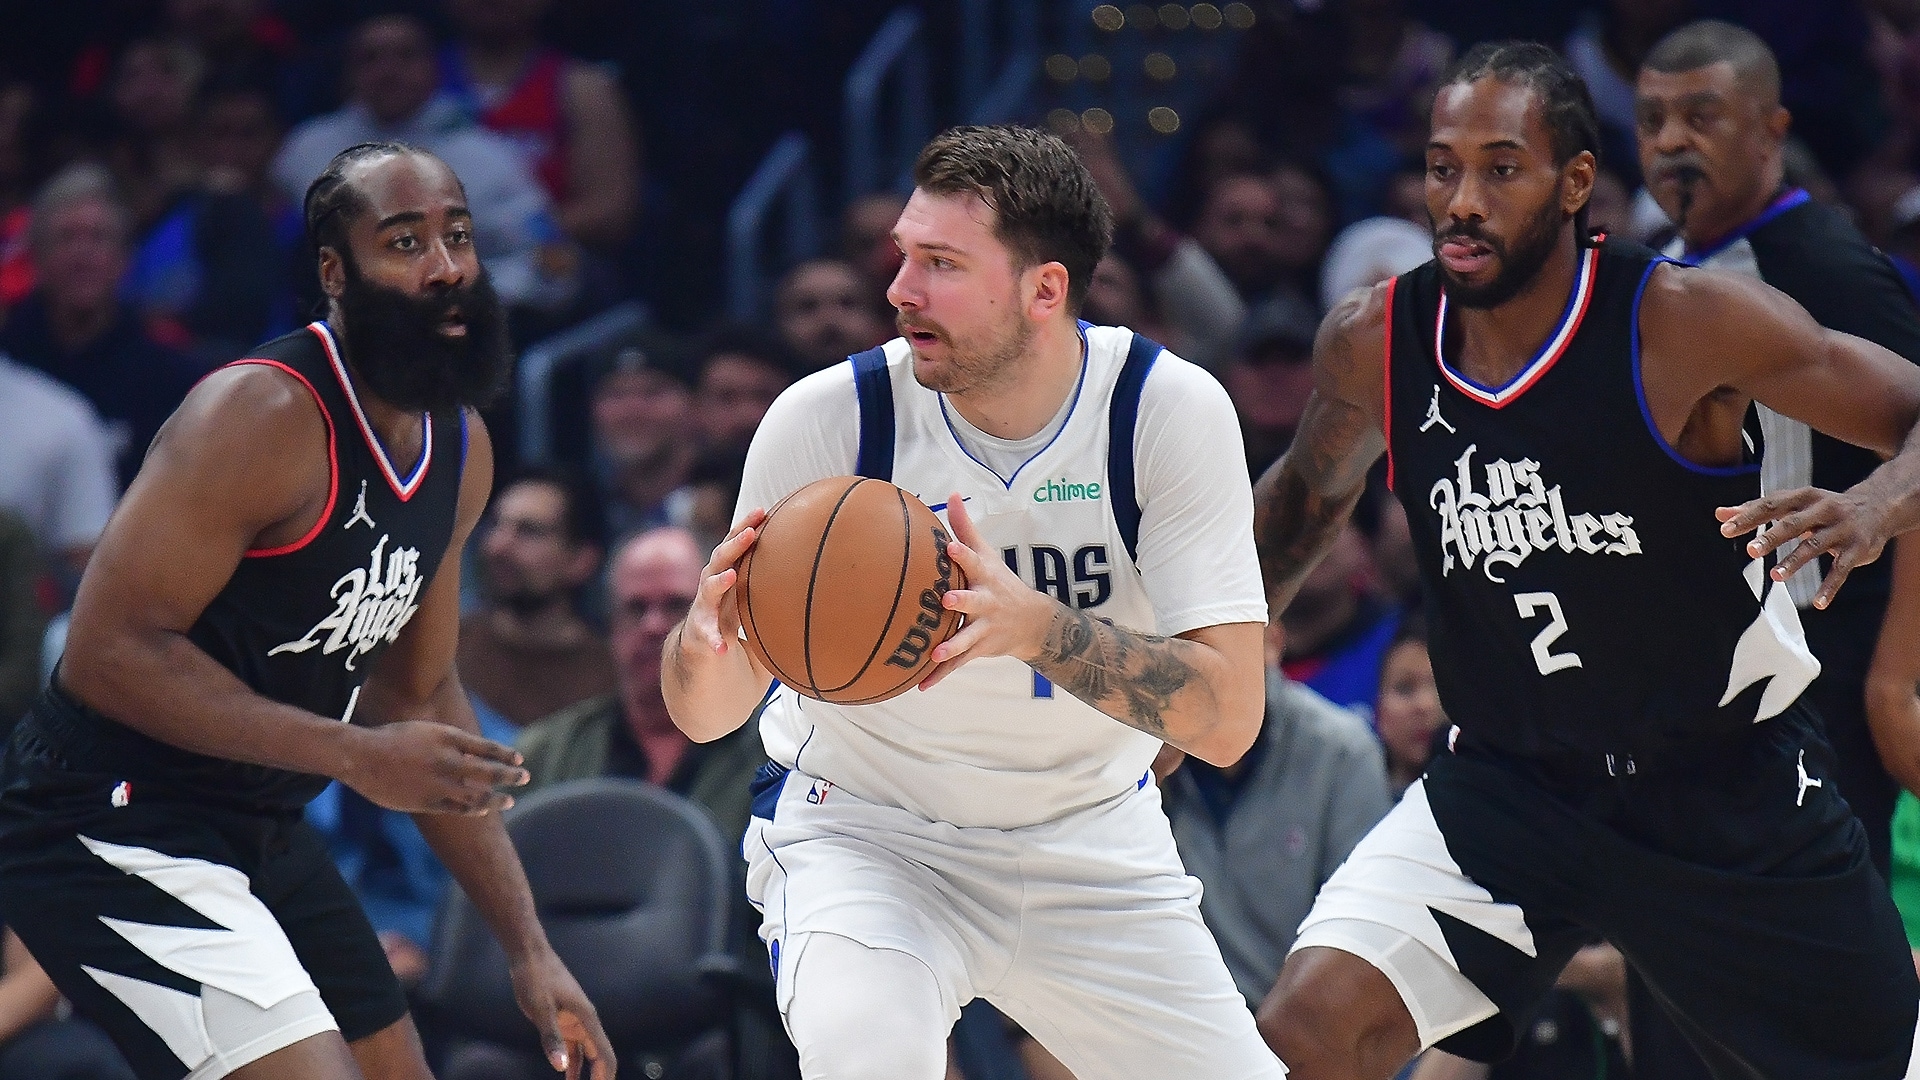 Clippers-Mavericks: Schedule, how to watch, predictions & analysis